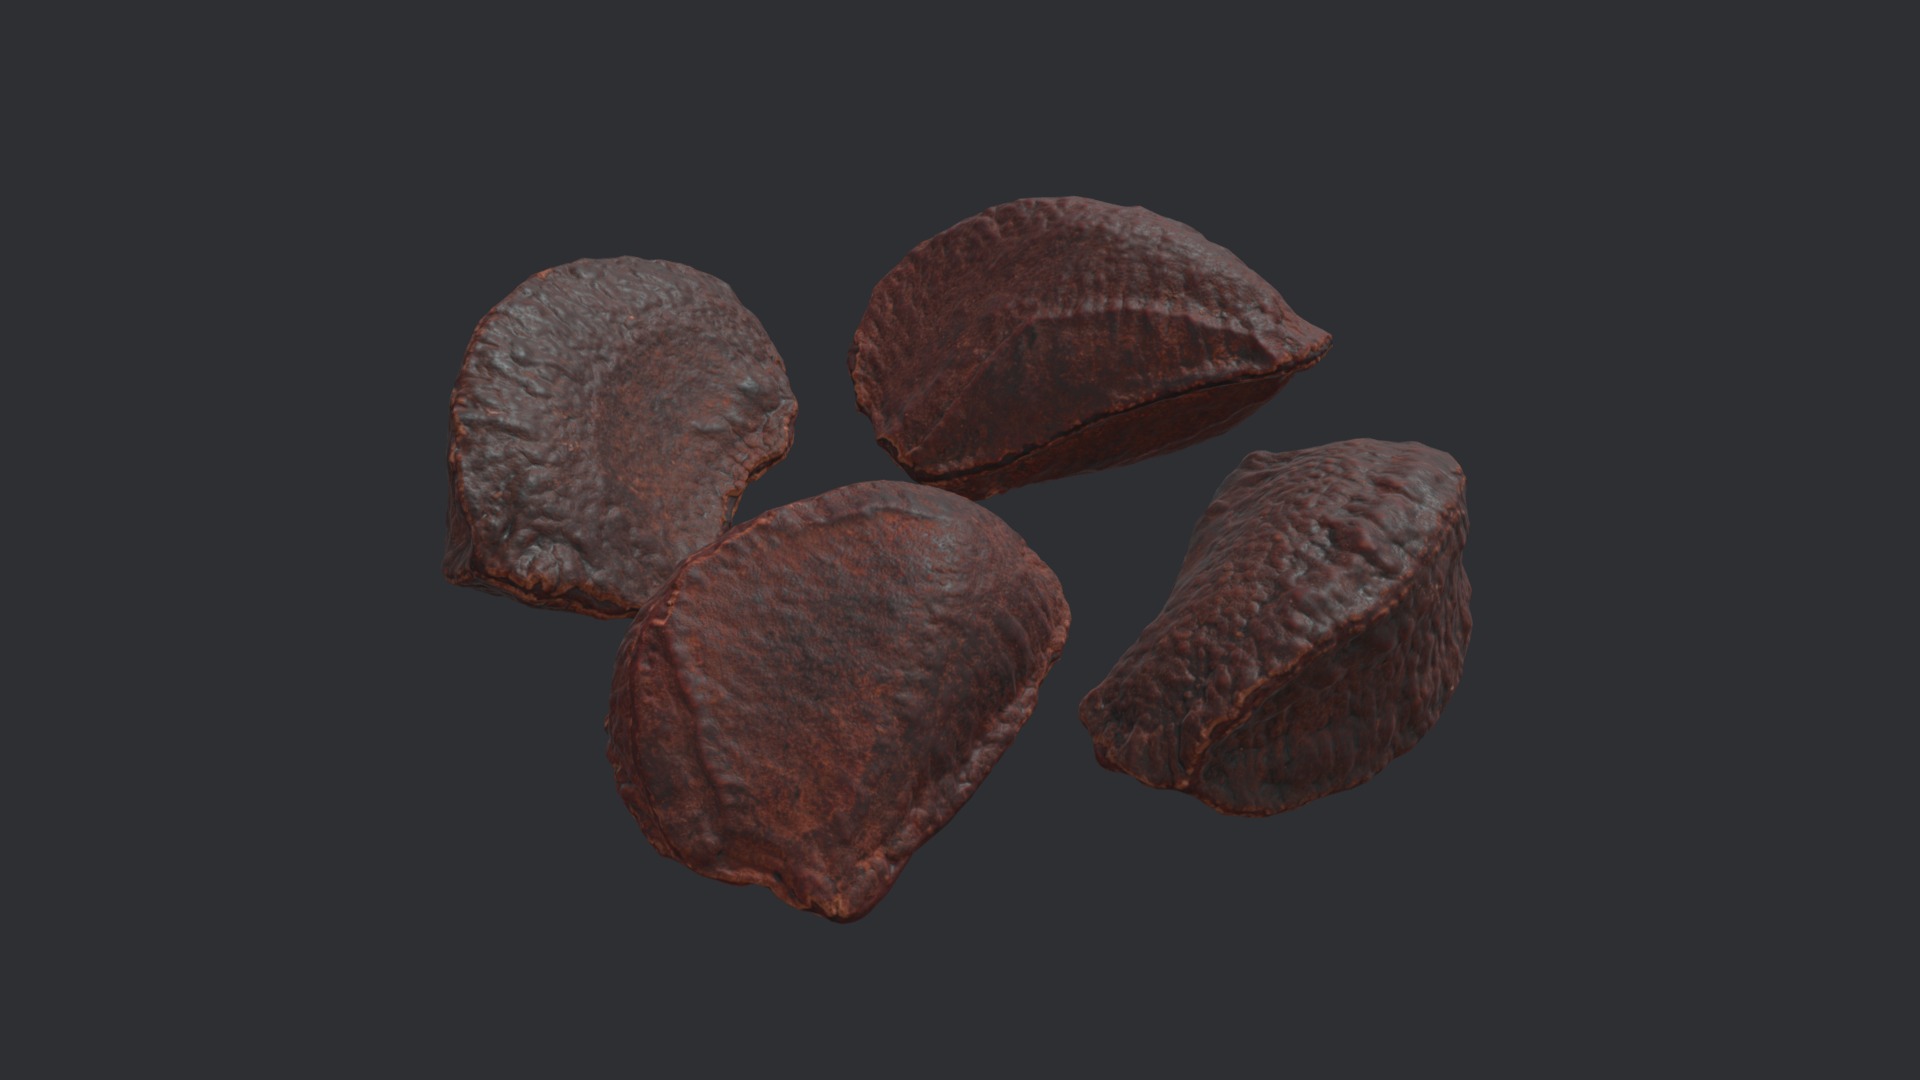 3D model Unshelled Brazil Nuts - This is a 3D model of the Unshelled Brazil Nuts. The 3D model is about a group of brown rocks.